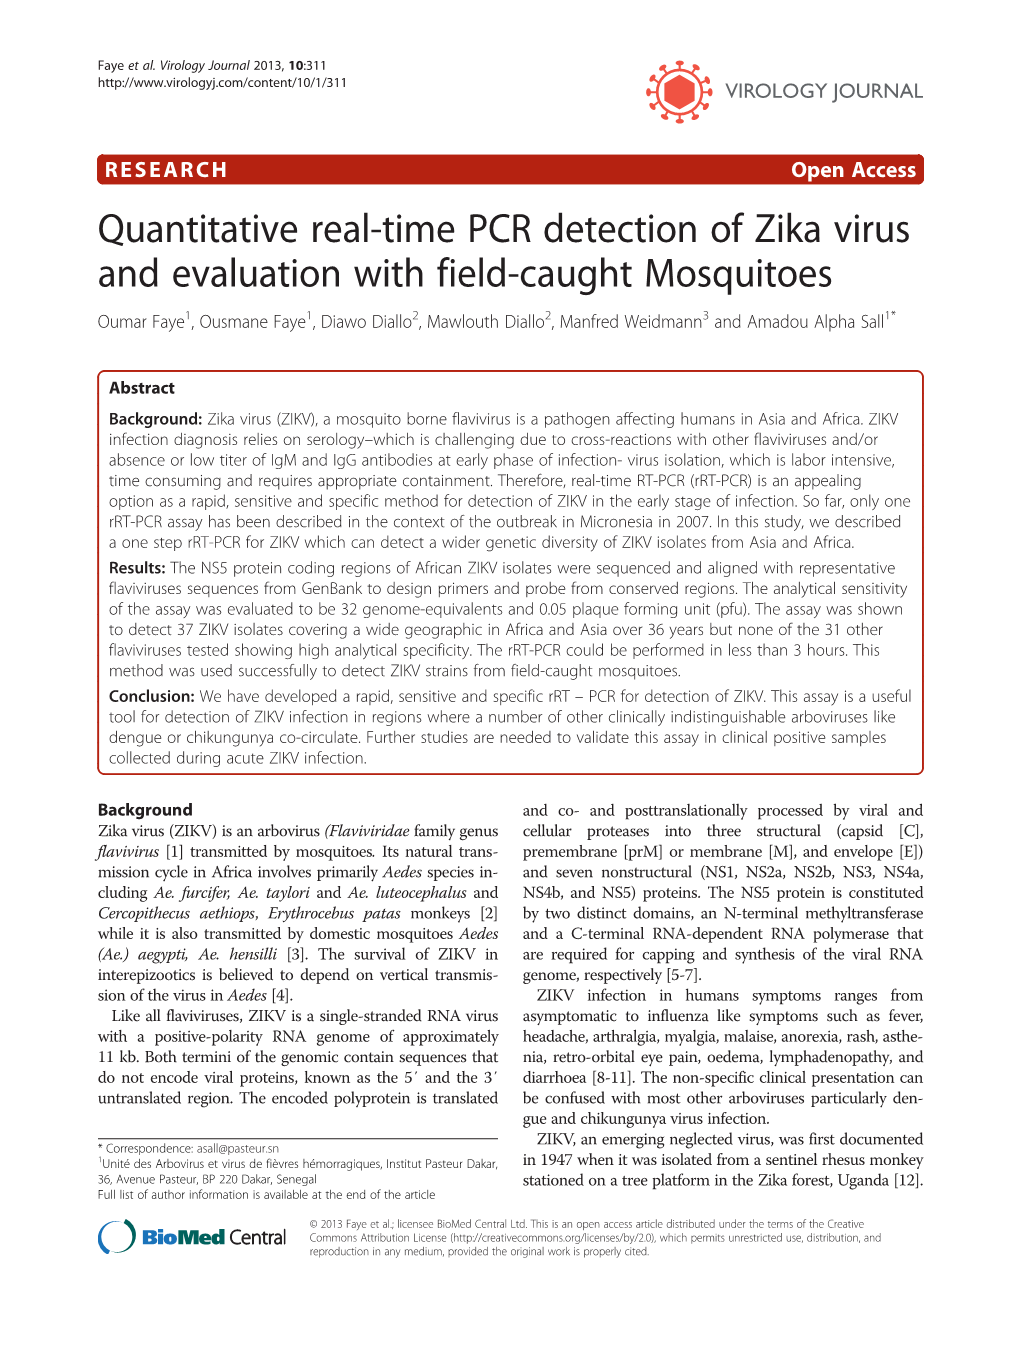 Quantitative Real-Time PCR Detection of Zika Virus and Evaluation With